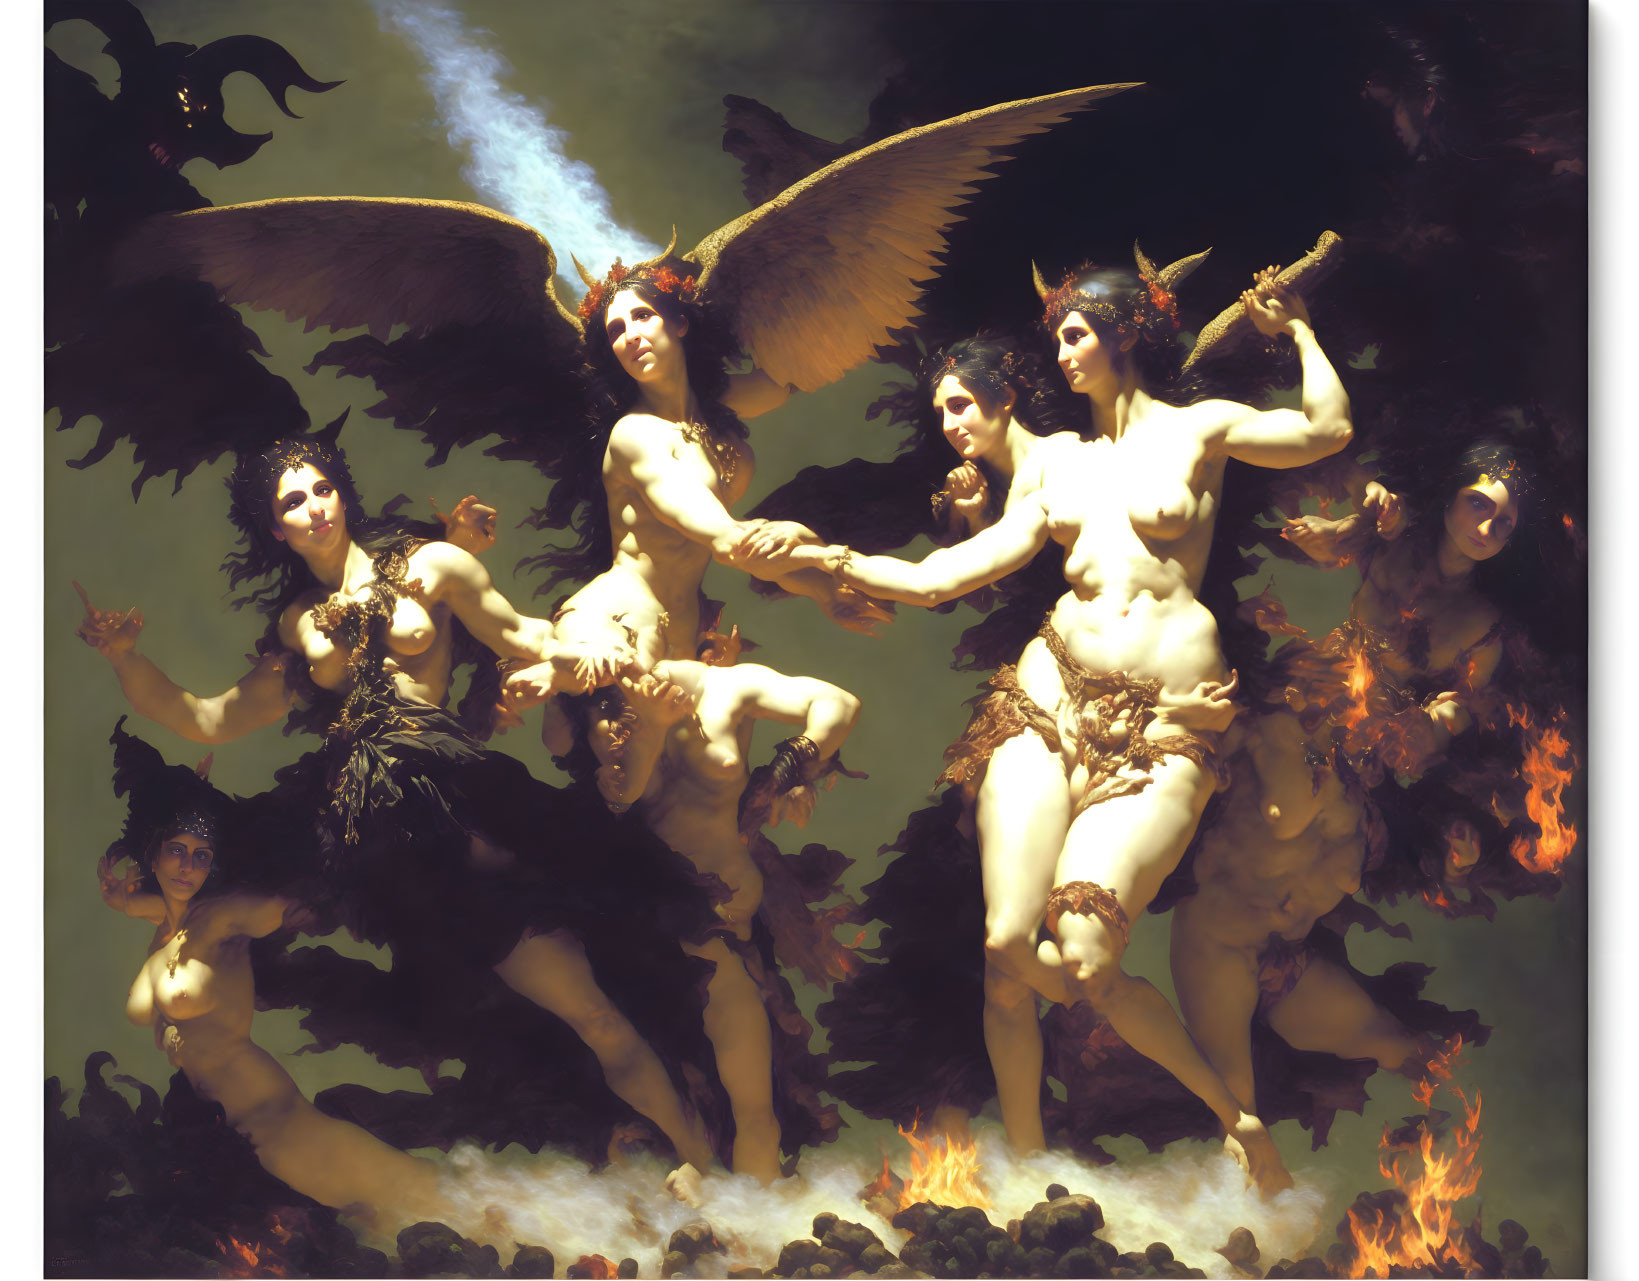 Fantasy painting of six winged demonic figures in flames, with dark creature above